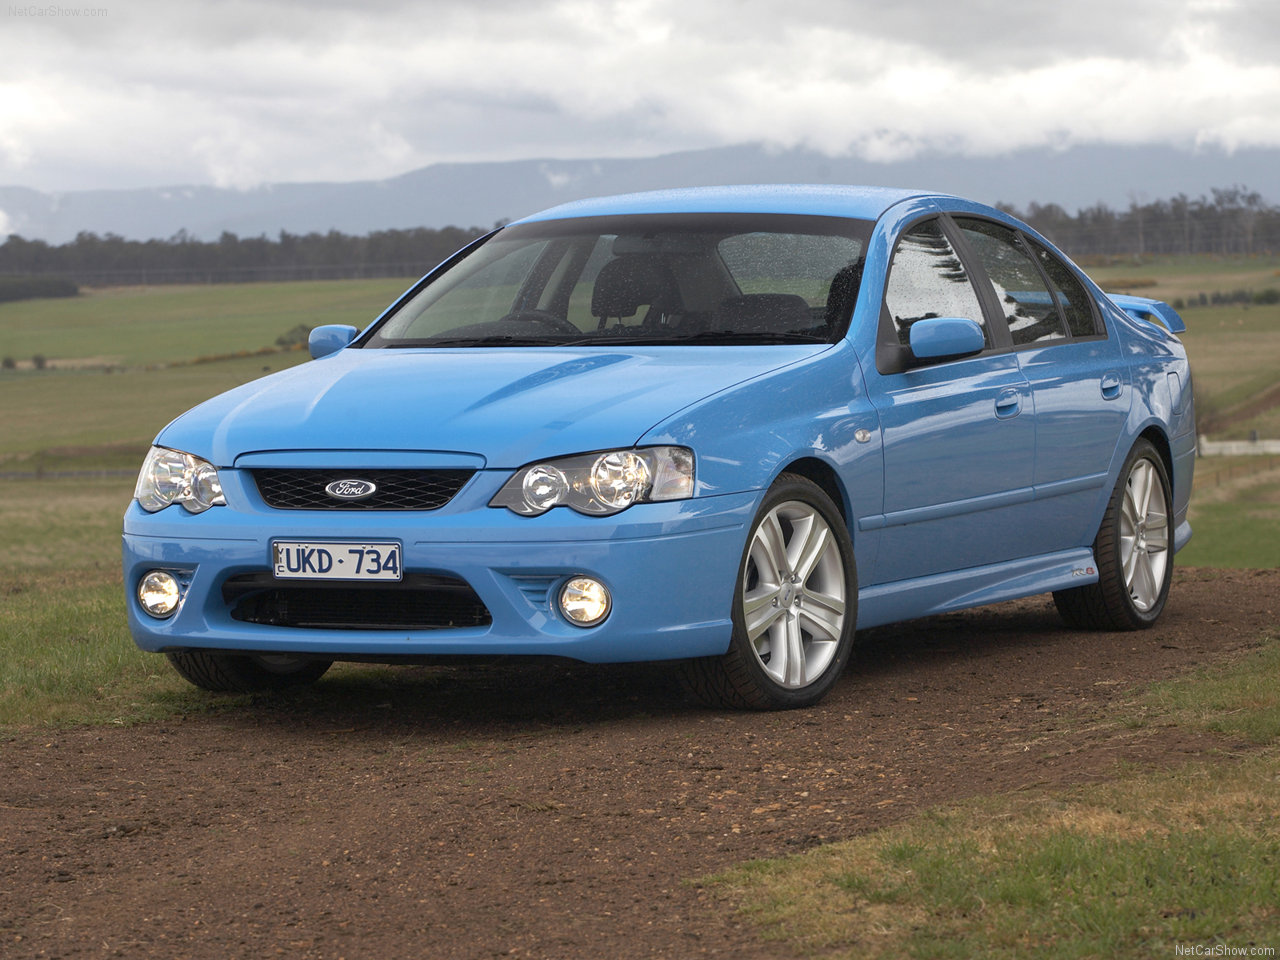 Ford - Populaire français d'automobiles: 2006 Ford BF MkII Falcon XR8